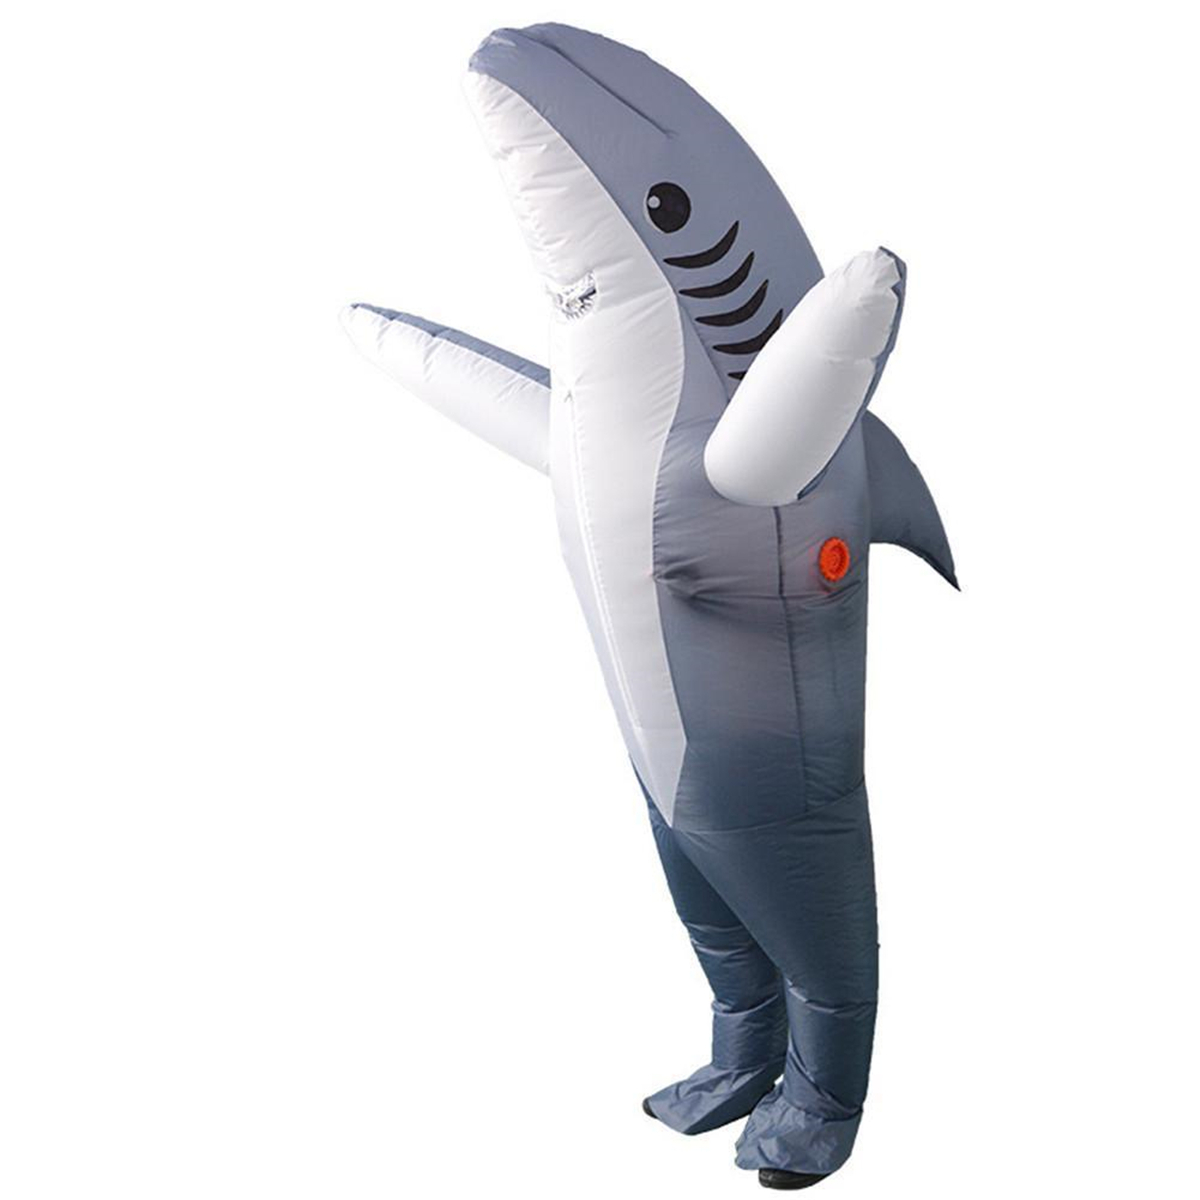 Inflatable Costumes Shark Adult Halloween Fancy Dress Funny Scary Dress Costume 11